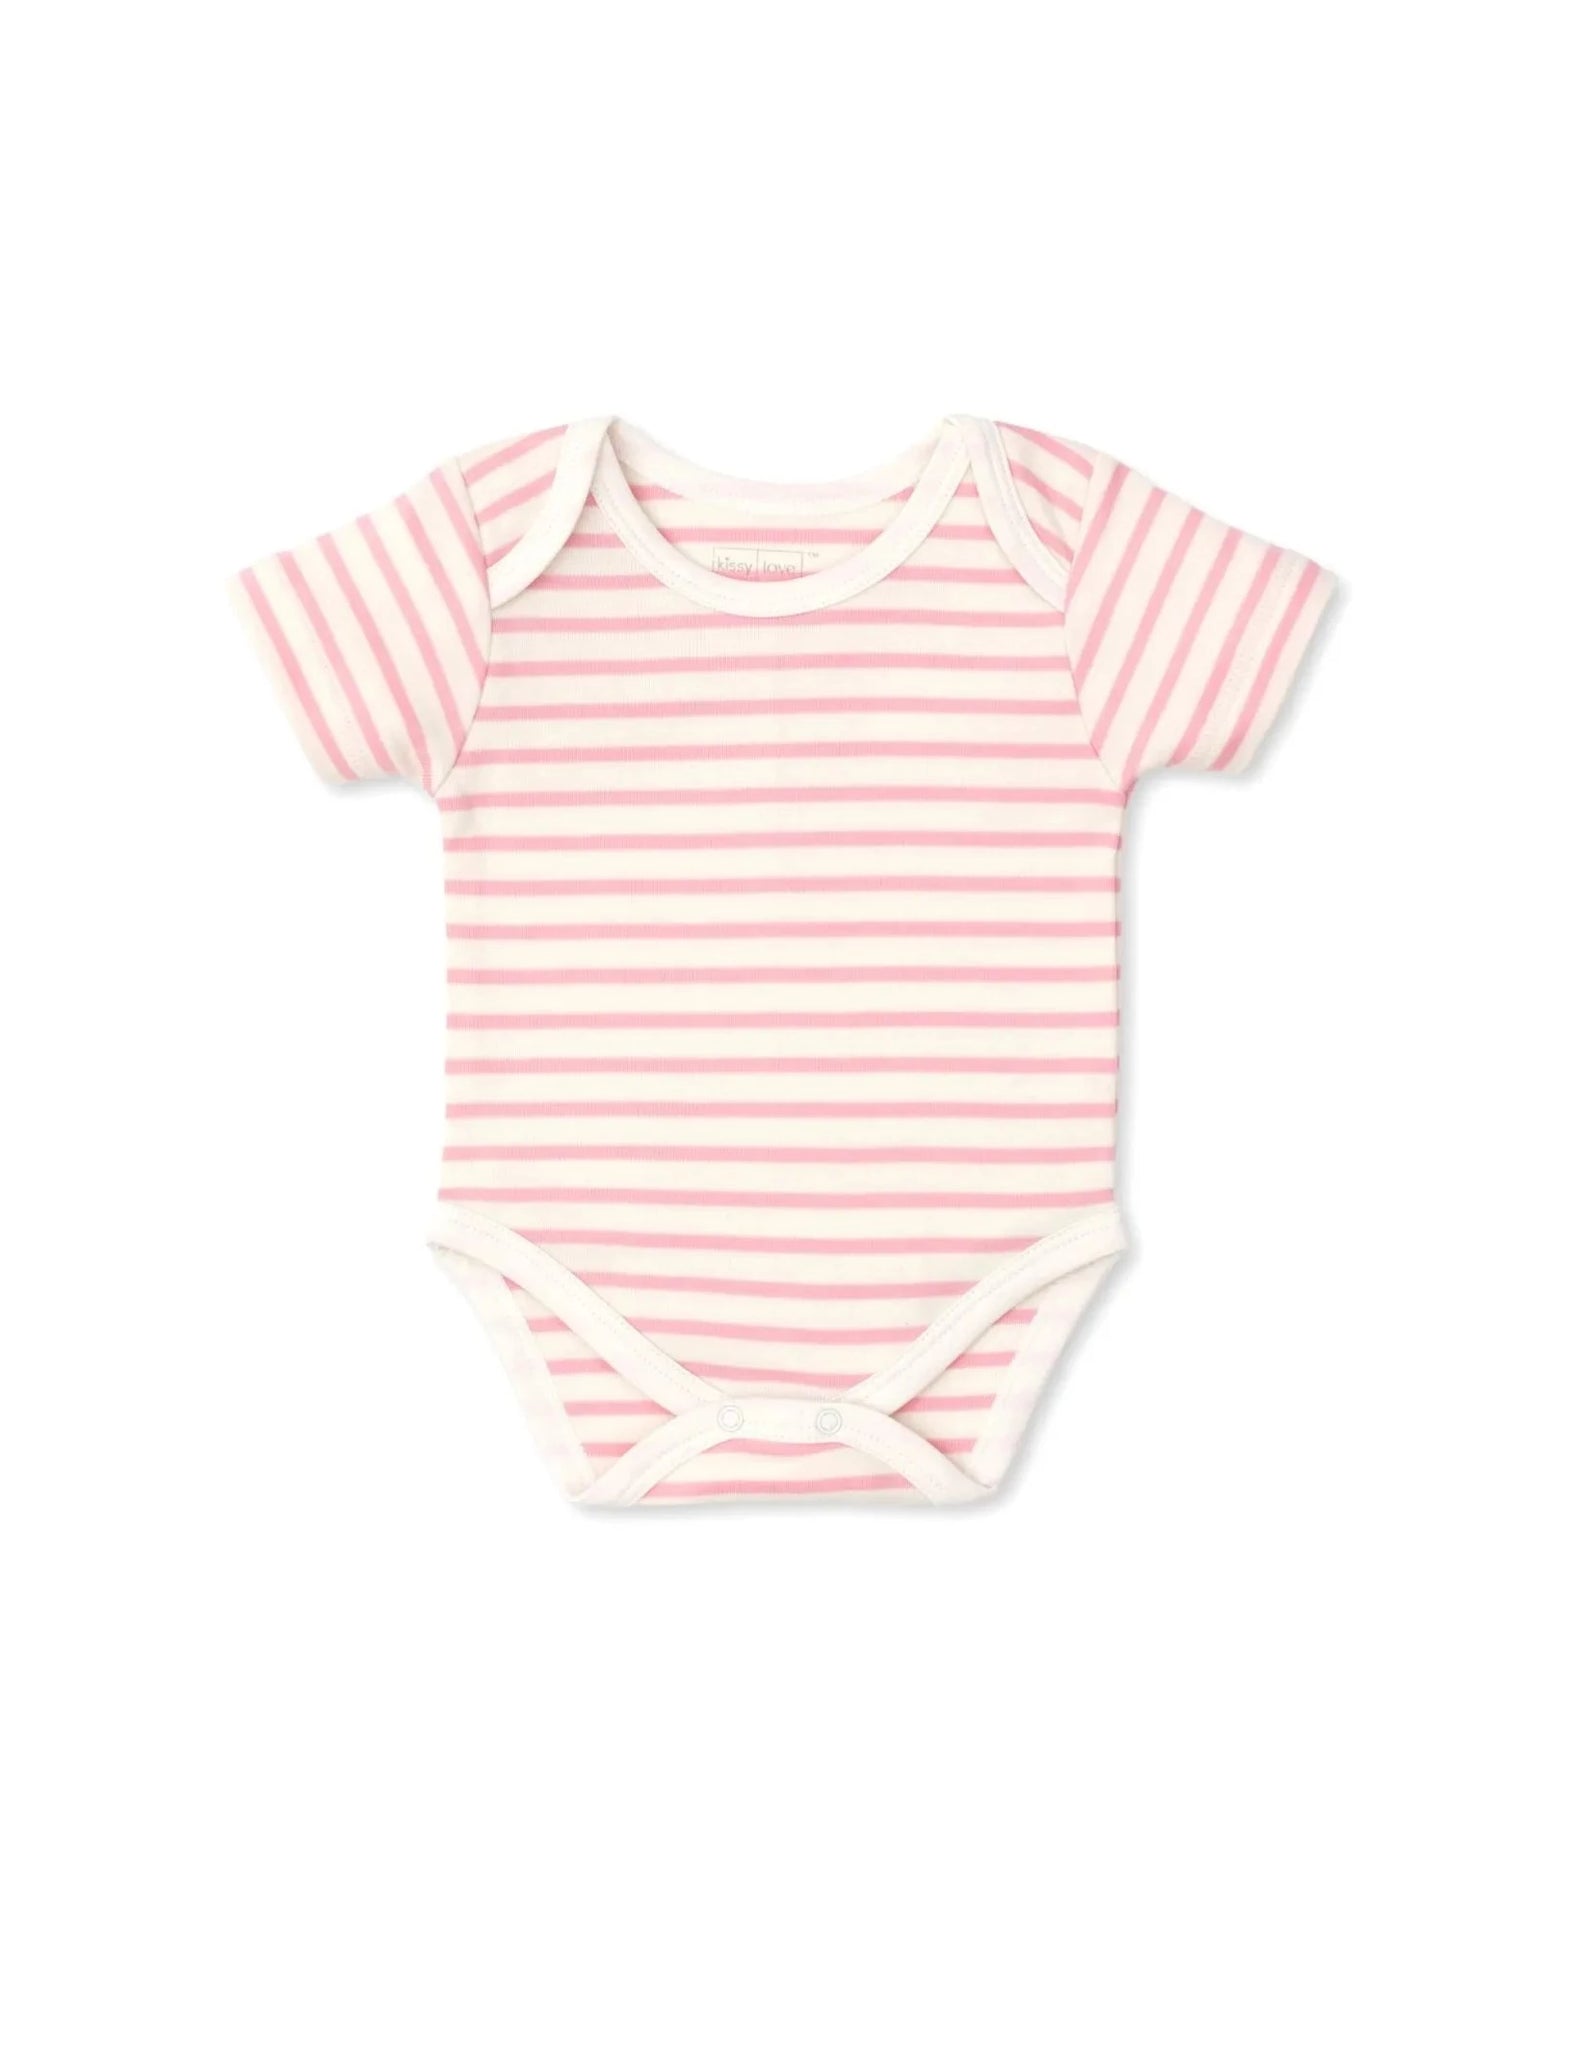 pink and white striped short sleeve onesie